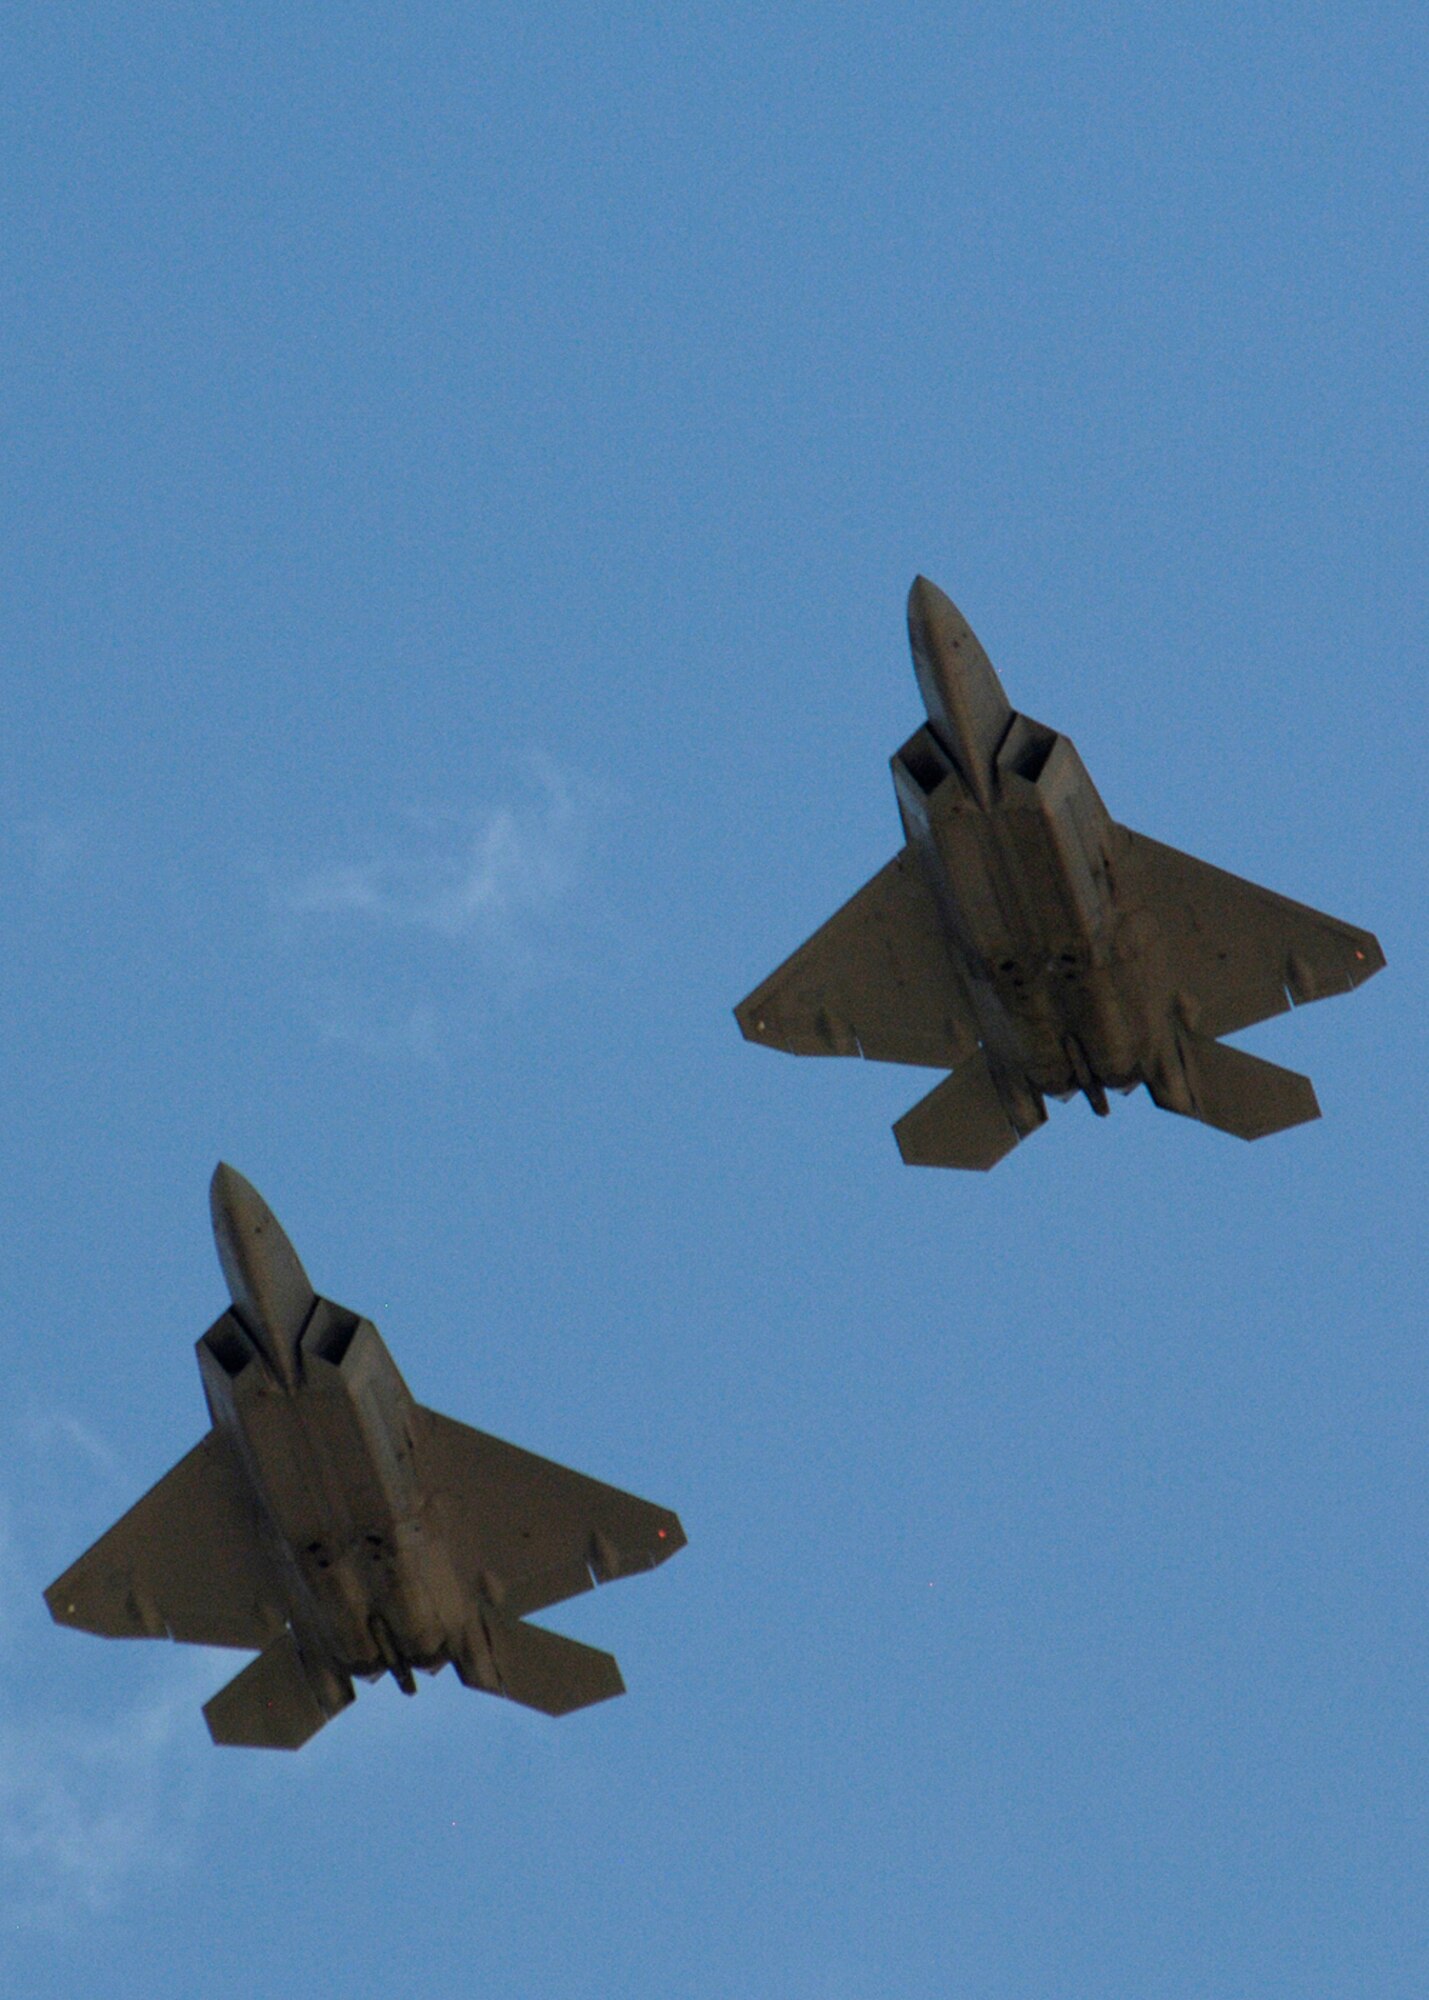 Col. Jeff Harrigian, 49th Fighter Wing commander, and Lt. Col. Mike Hernandez, 7th Fighter Squadron commander, fly a pair of F-22A Raptors over the skies of Holloman Air Force Base, N.M., June 2. The jets are the first two Holloman-tailed F-22s to arrive on base. Prior to landing, the jets flew over the Tularosa Basin, the community had the chance to witness the future of Holloman. (U.S. Air Force photo/Airman 1st Class Michael Means)